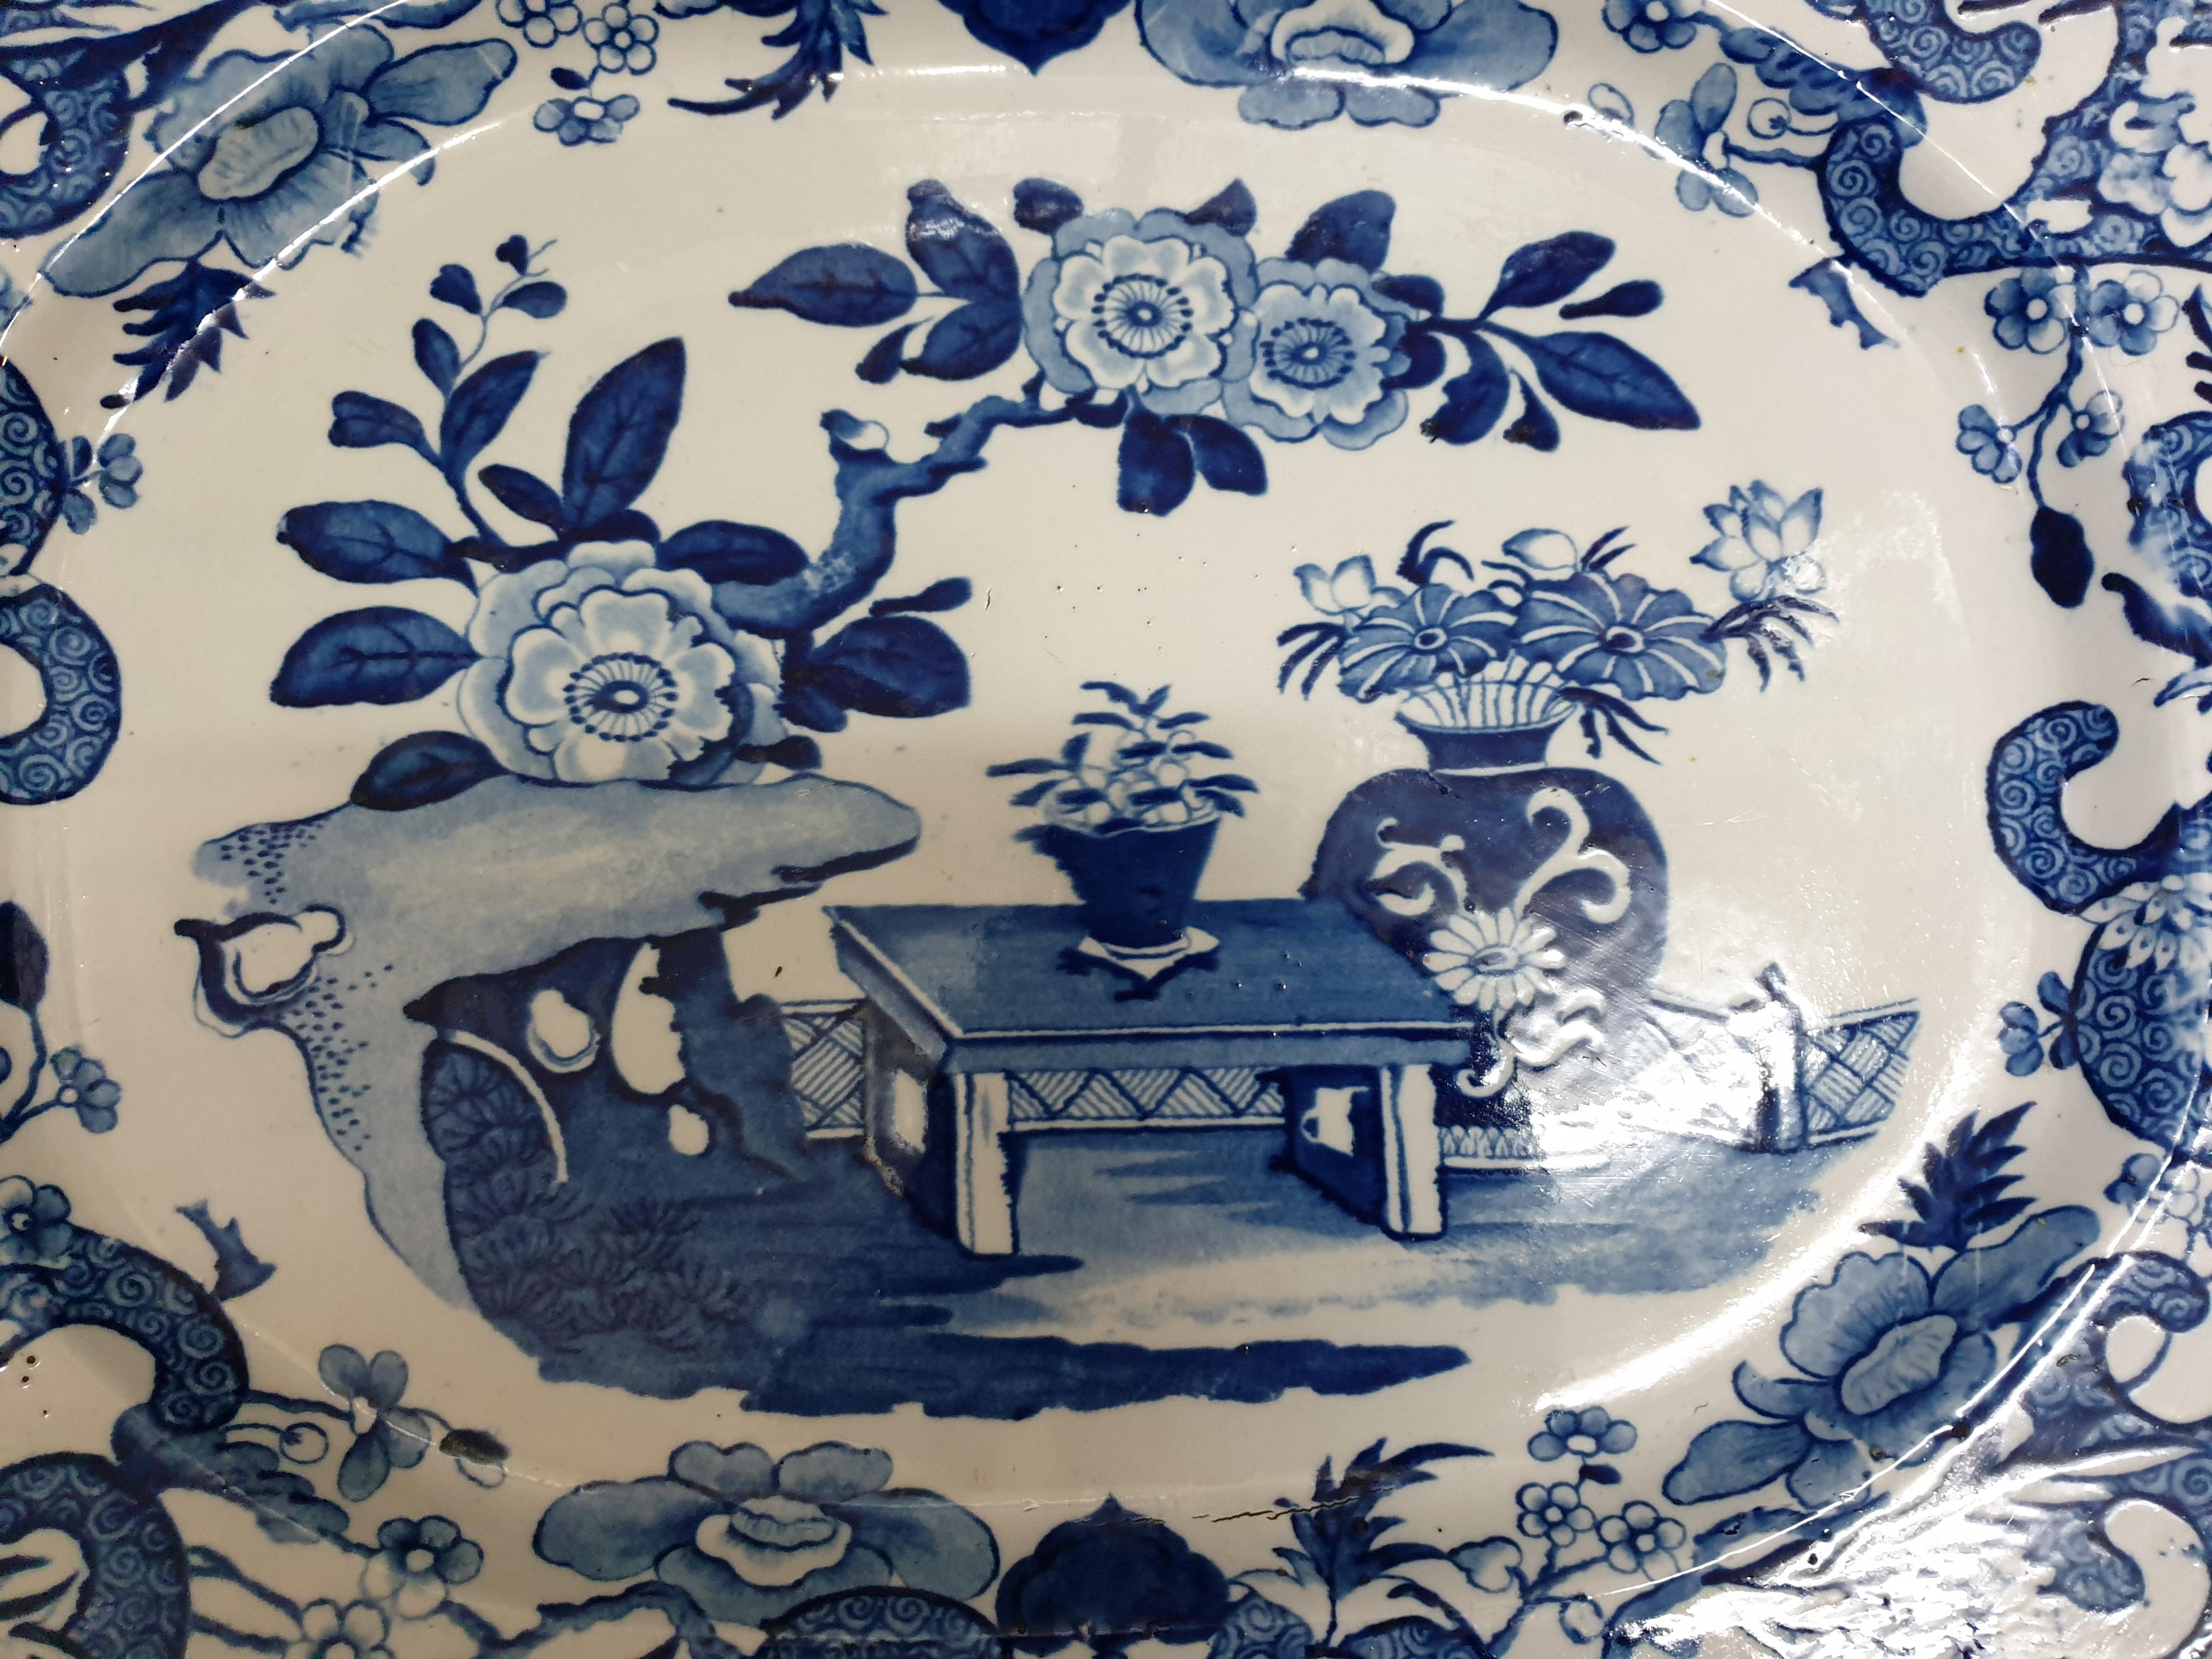 A Ridgeway Ironstone elegant table Platter ideal for serving up meats for any celebratory gatherings. In 1820s John and William Ridgeway started their own crafting of Ironstone Serving Ware. A beautiful platter made in Staffordshire Stoke - on